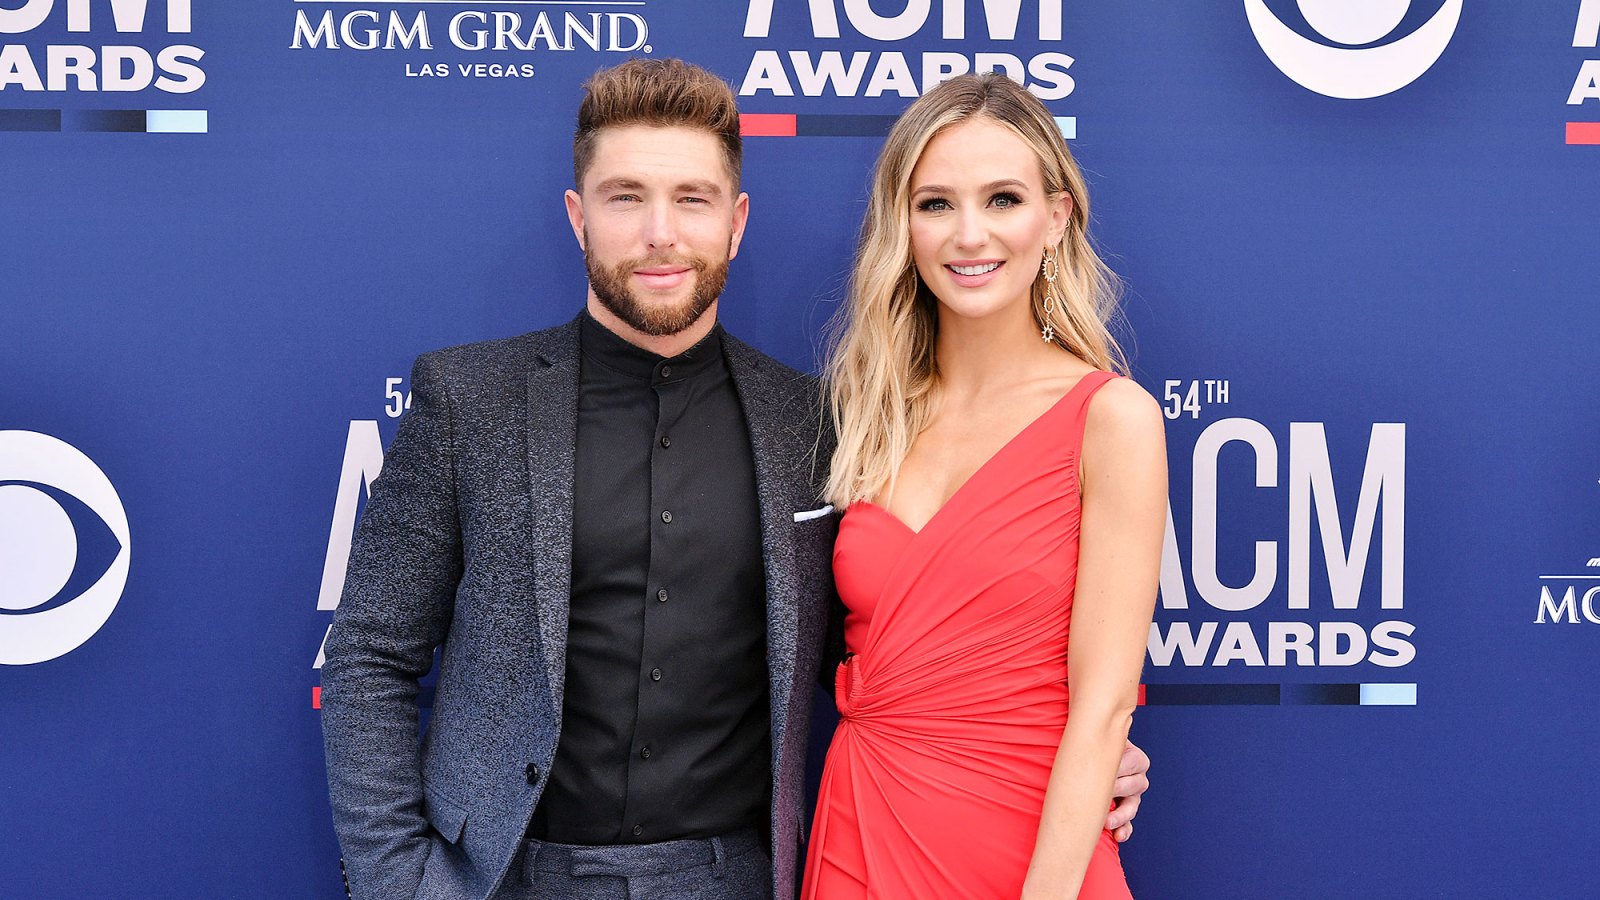 Chris Lane and Lauren Bushnell React to His Run-In With Ben Higgins at Golf Tournament